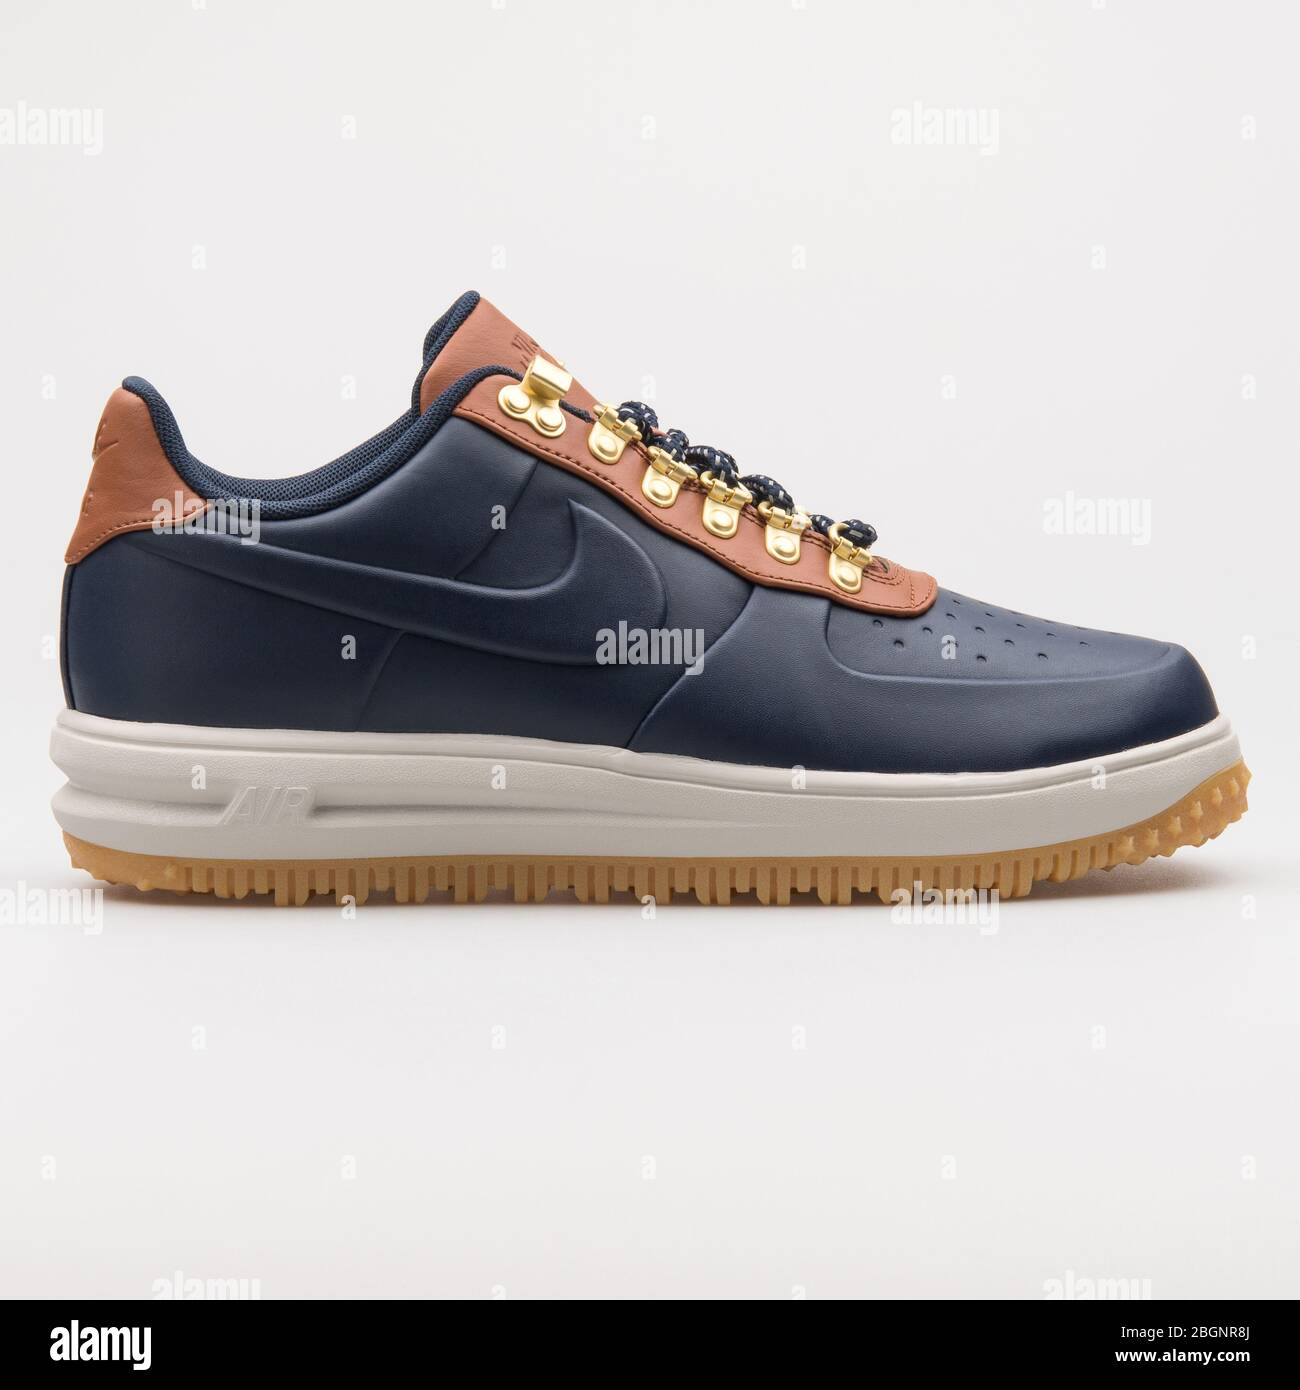 Bestuiver Wild Collega VIENNA, AUSTRIA - AUGUST 22, 2017: Nike Lunar Force 1 Duckboot Low obsidian  blue and brown sneaker on white background Stock Photo - Alamy